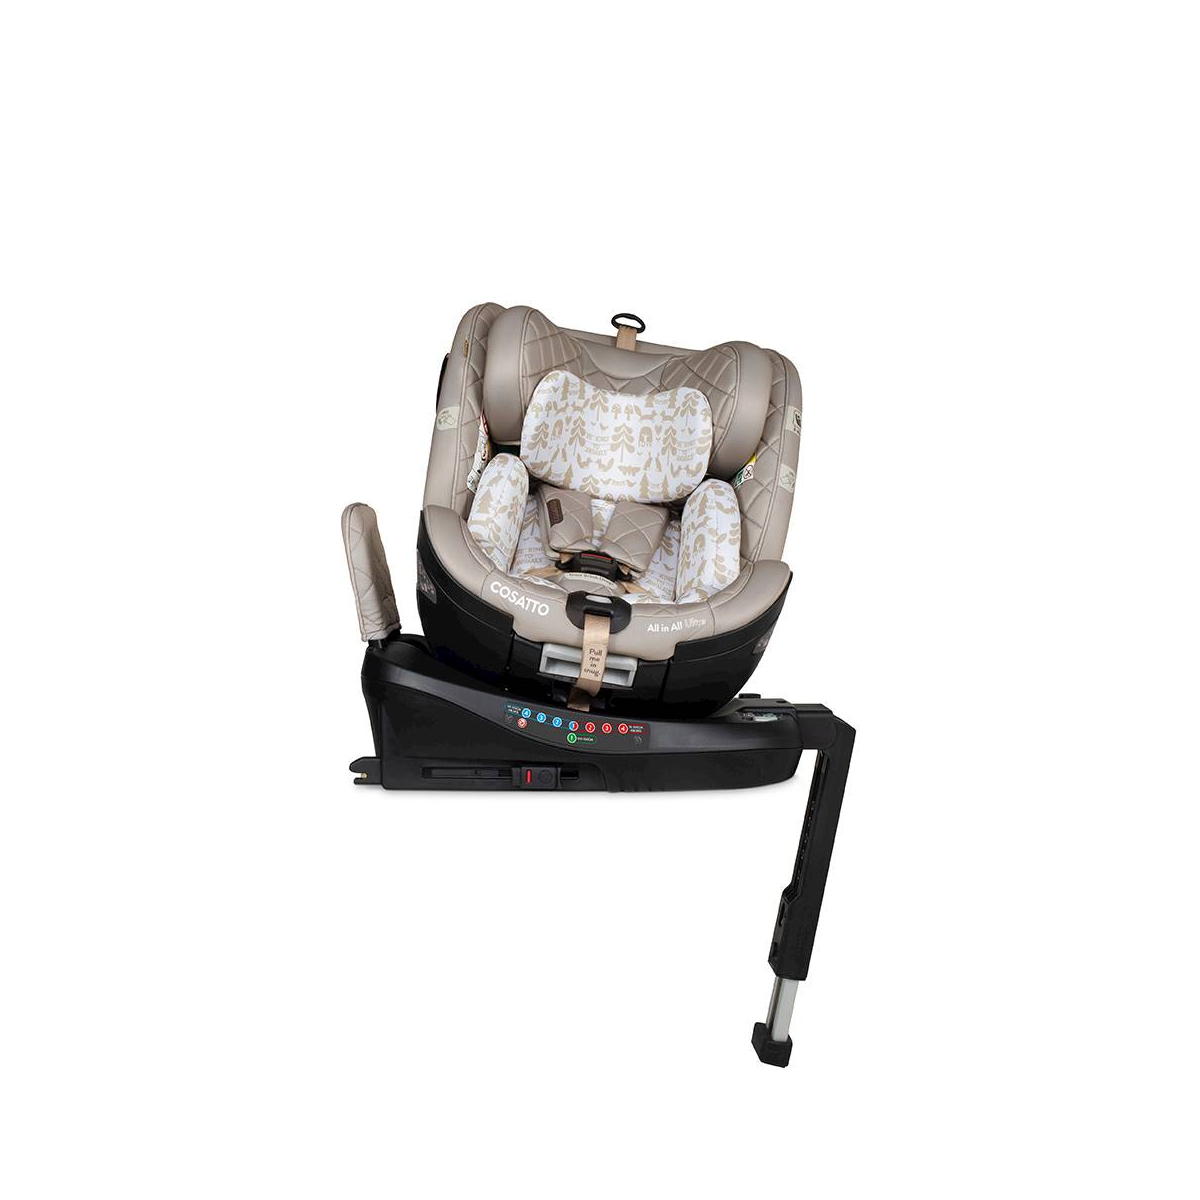 Cosatto All in All Ultra 360 Rotate I-size 0+/1/2/3 Car Seat